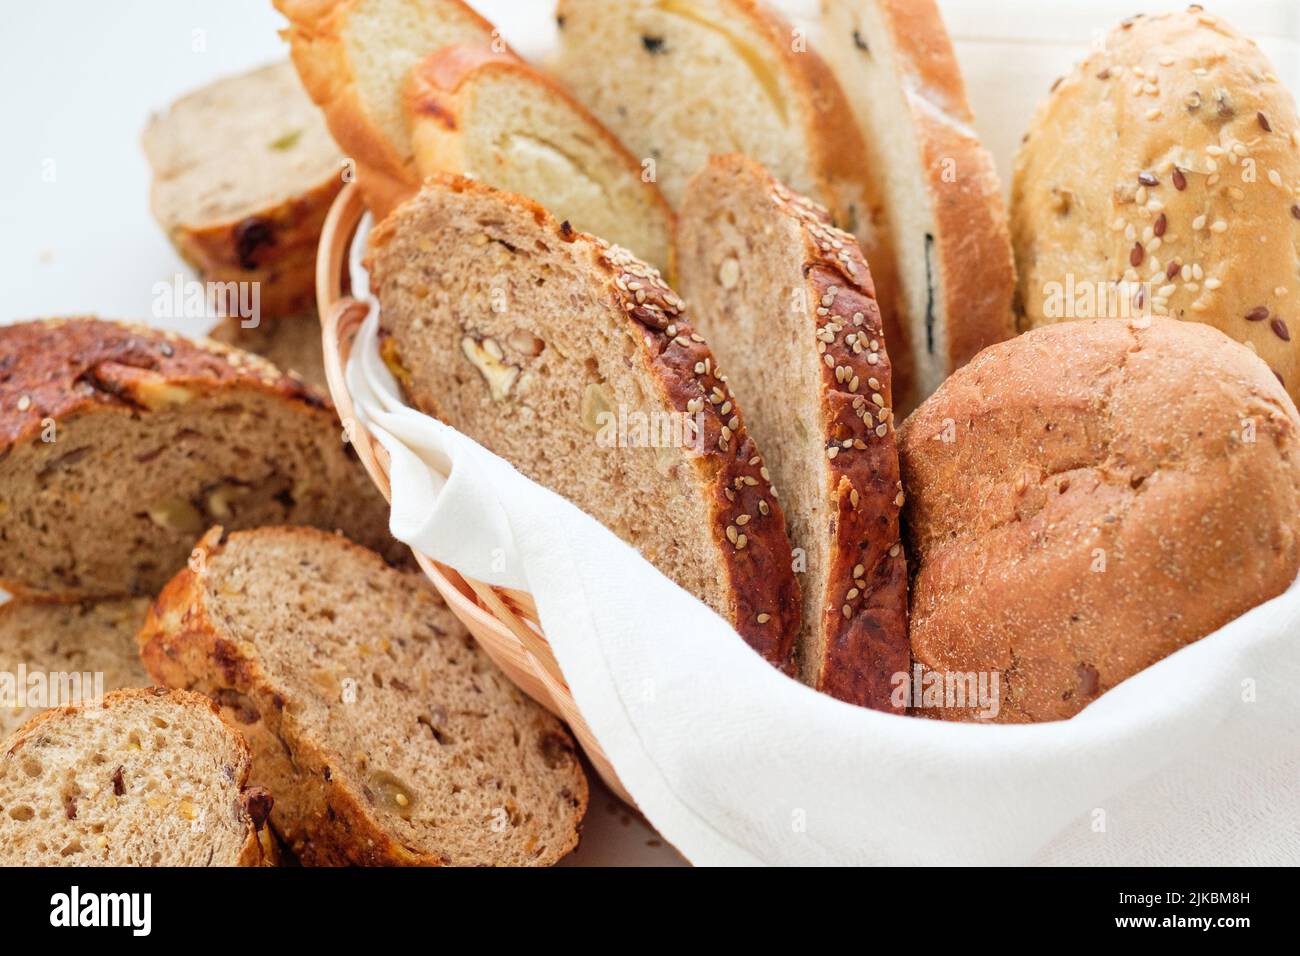 wholesome bakery background craft bread art Stock Photo